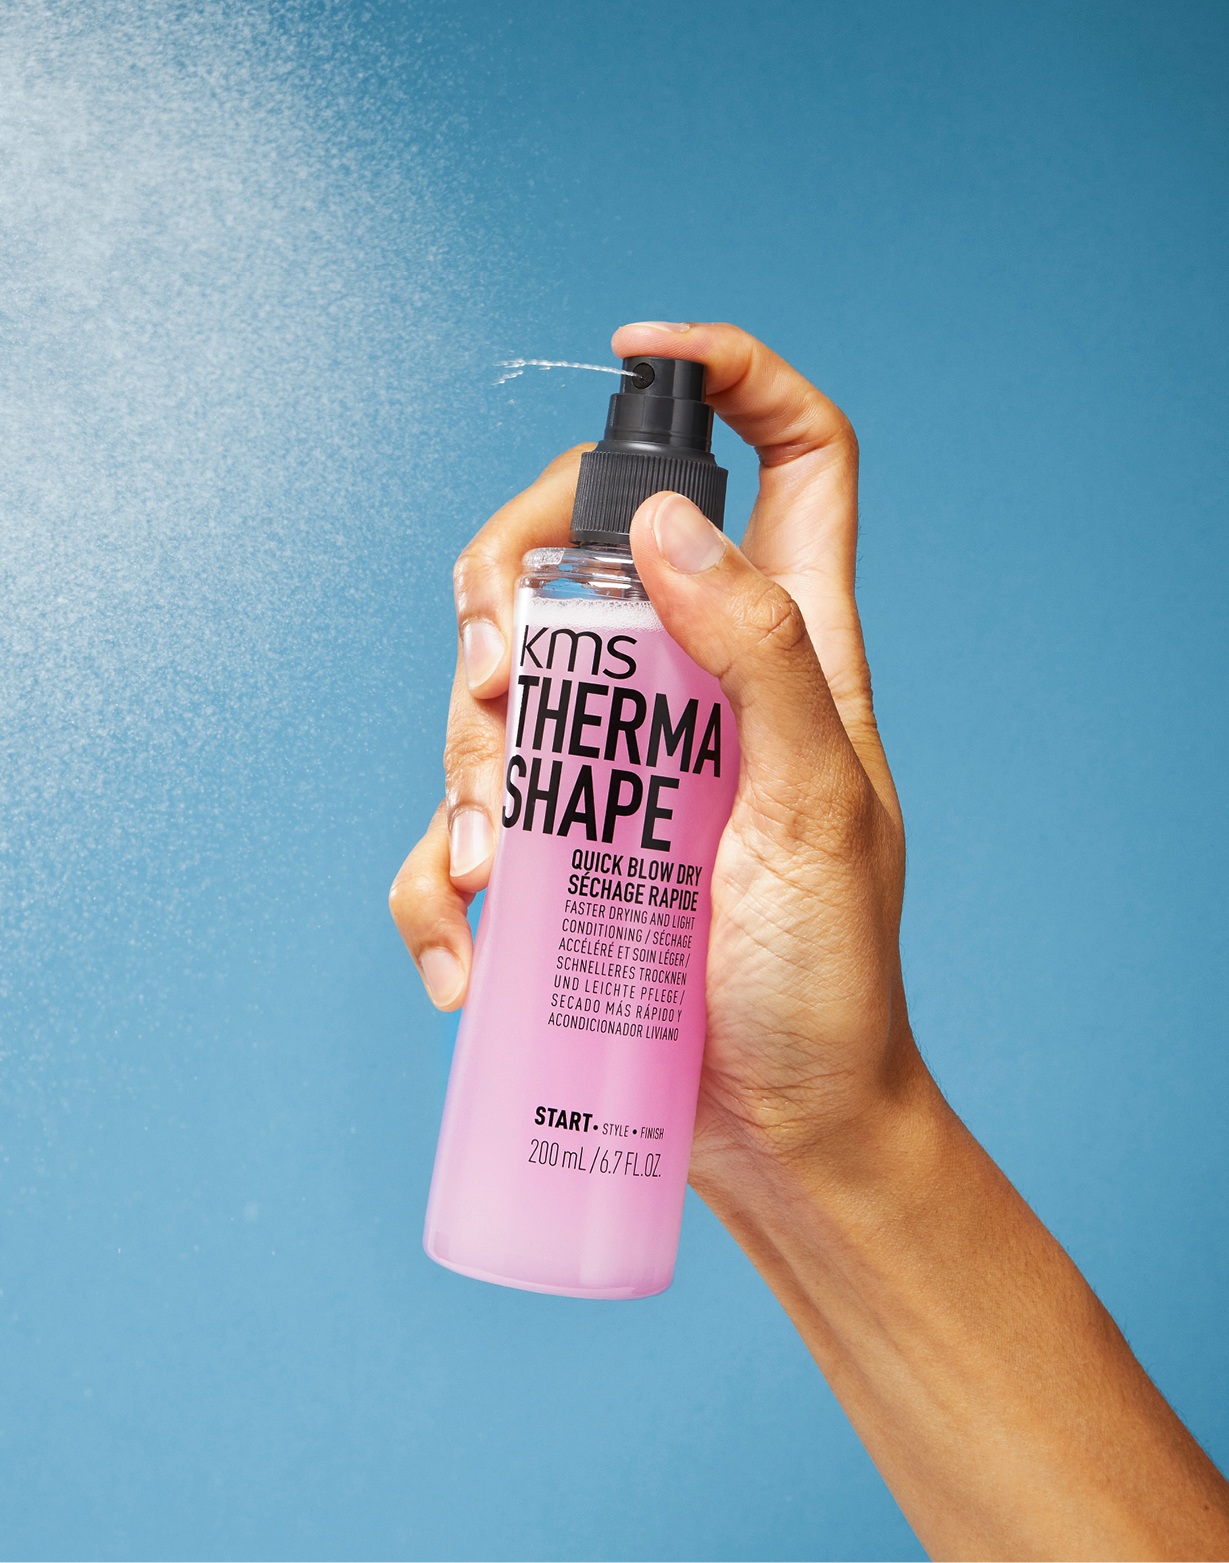 KMS Thermashape Quick Blow Dry